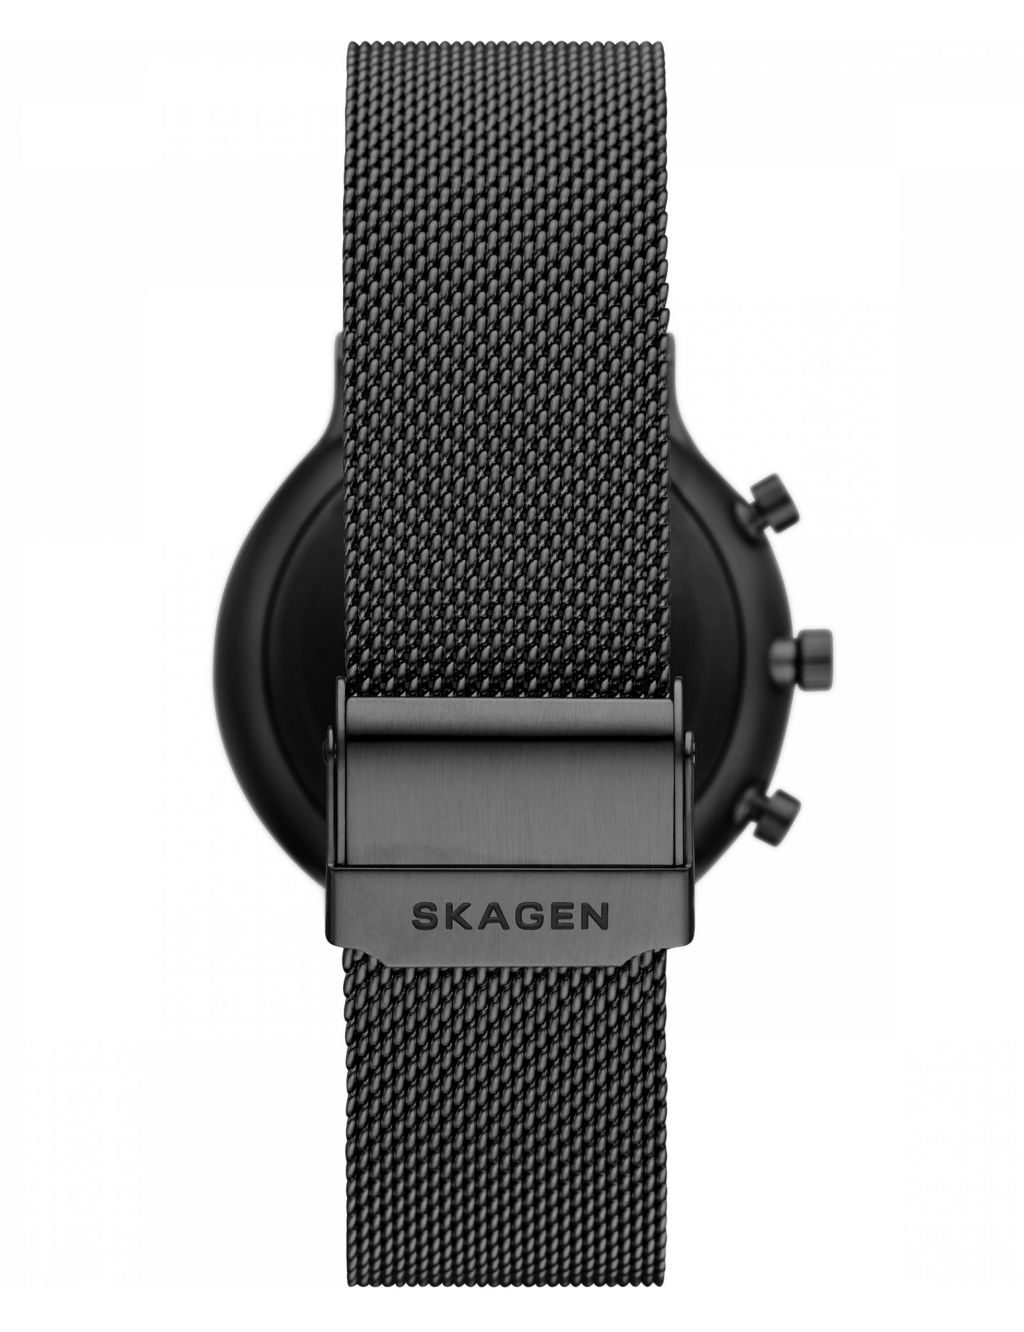 Skagen Anchor Chronograph Black Stainless Steel Watch image 5